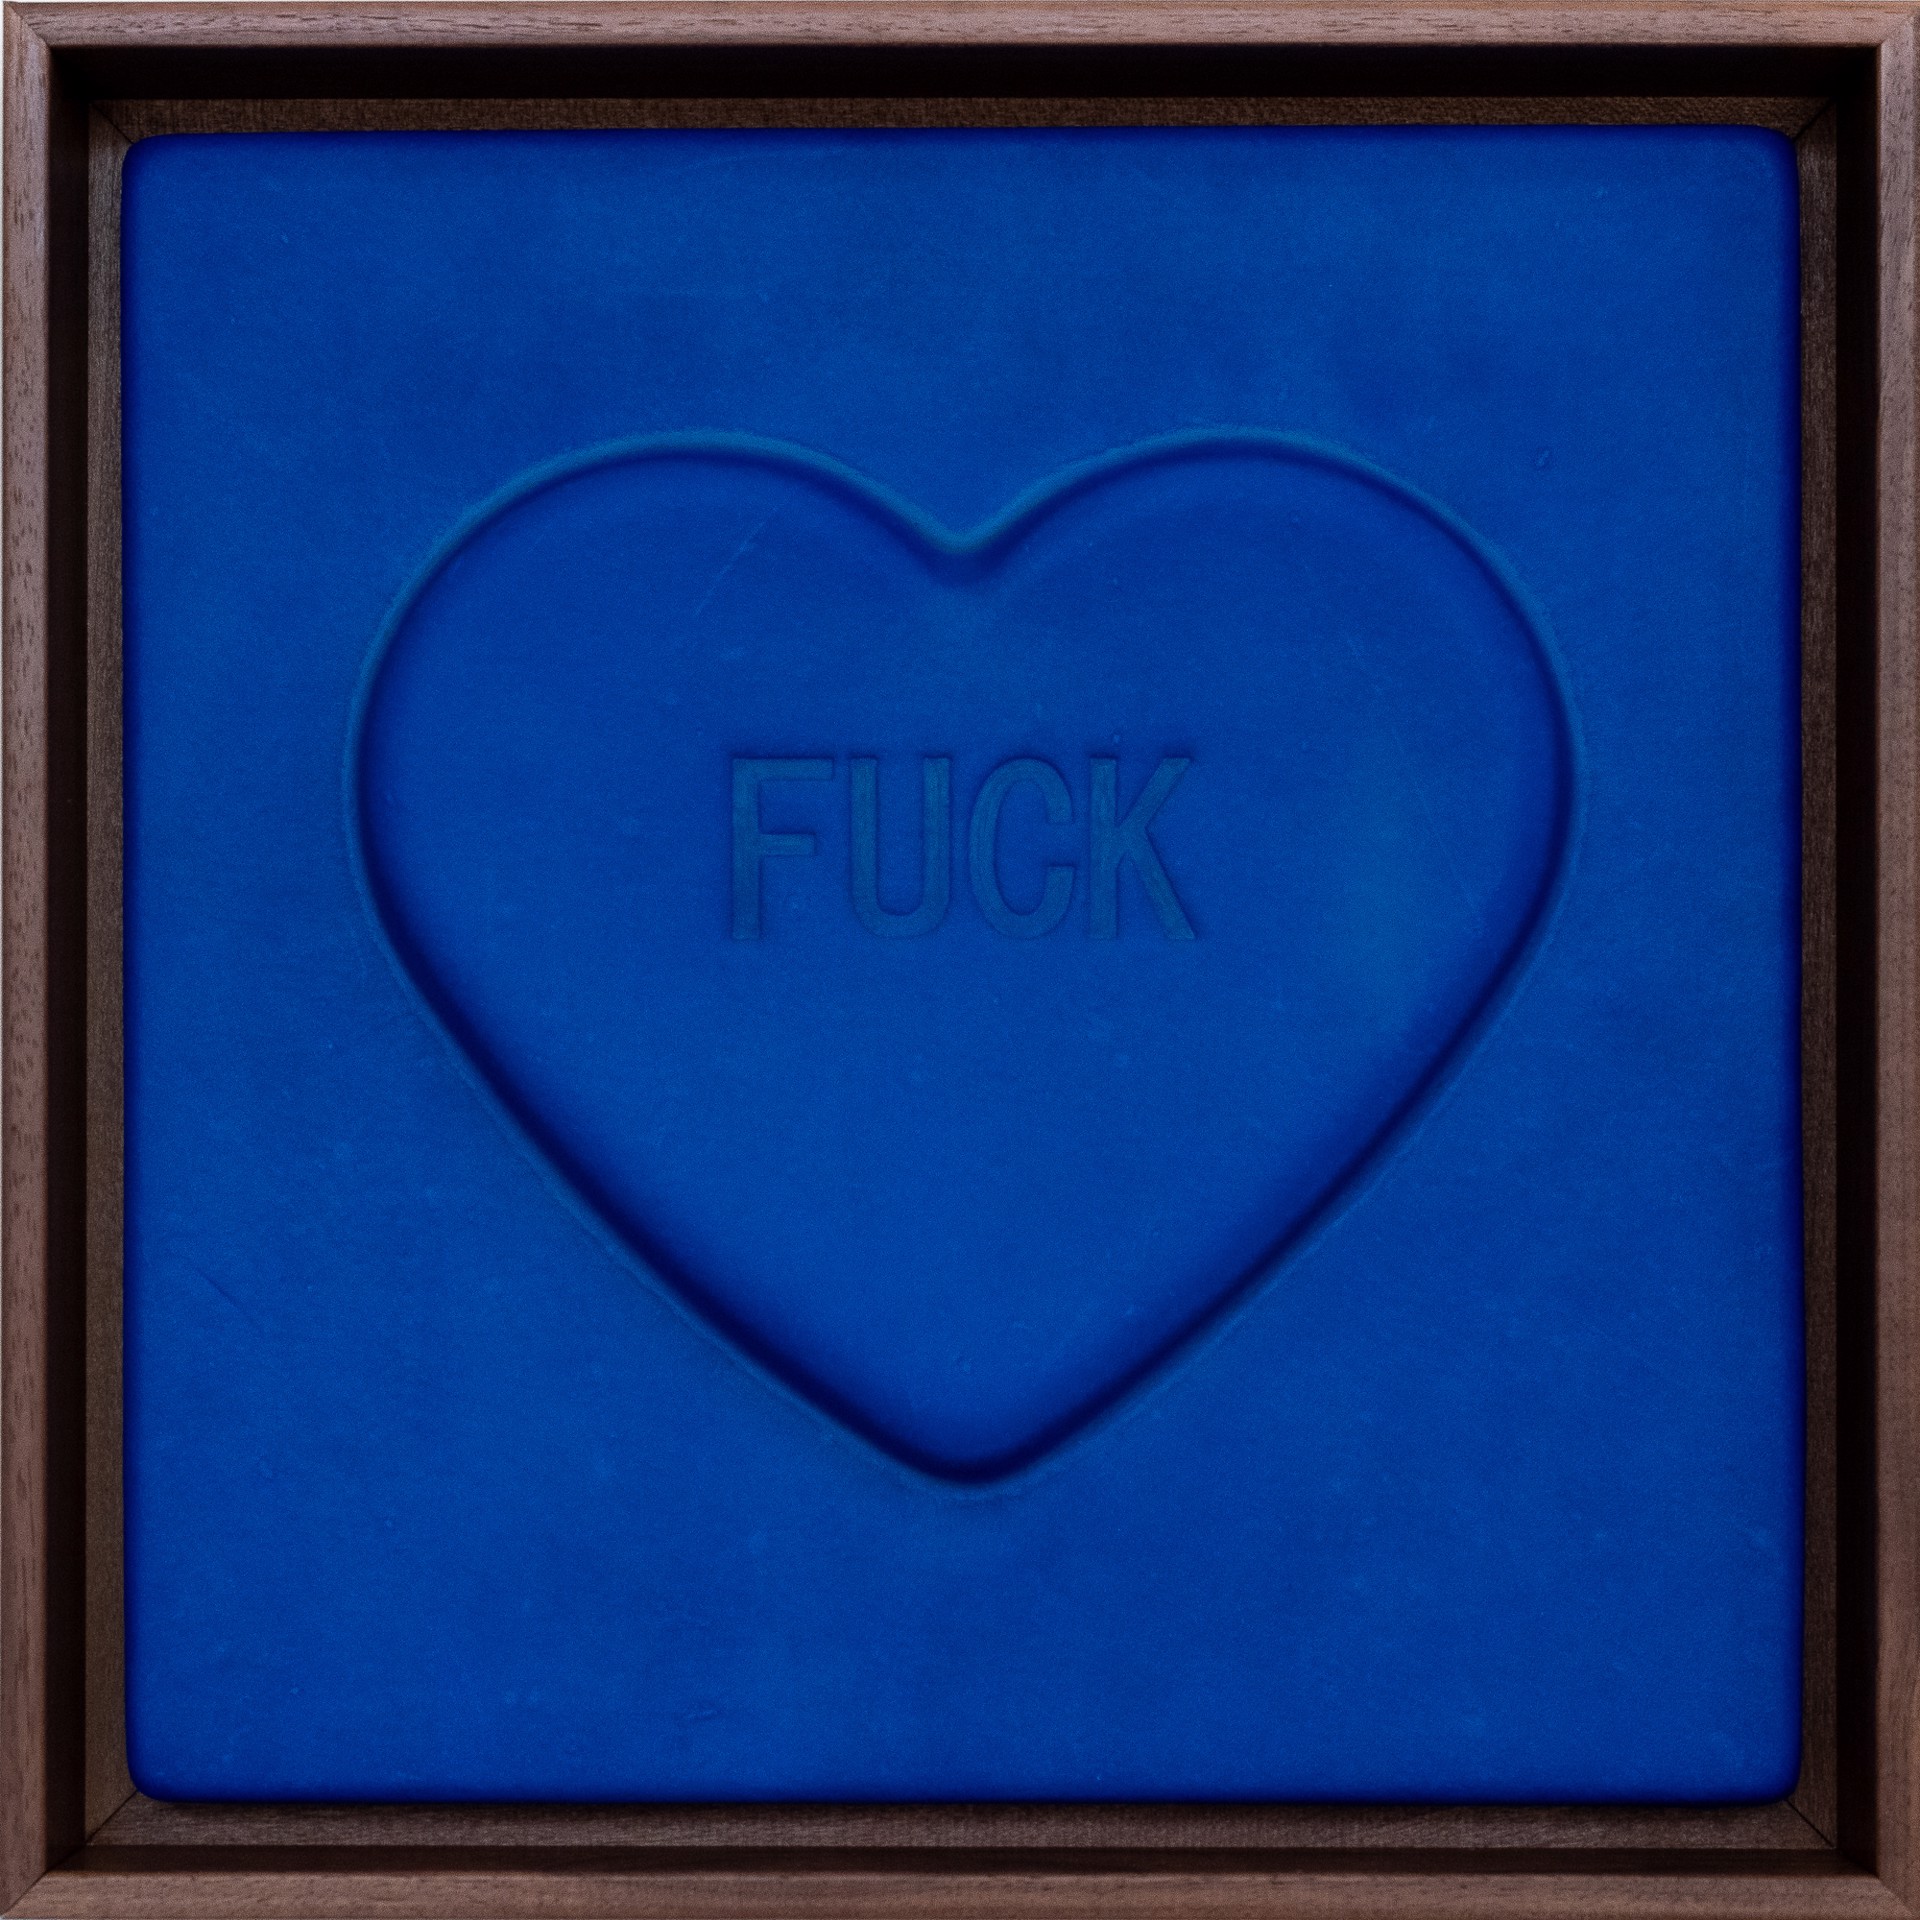 'Fuck' - Sweetheart series by Mx. Hyde